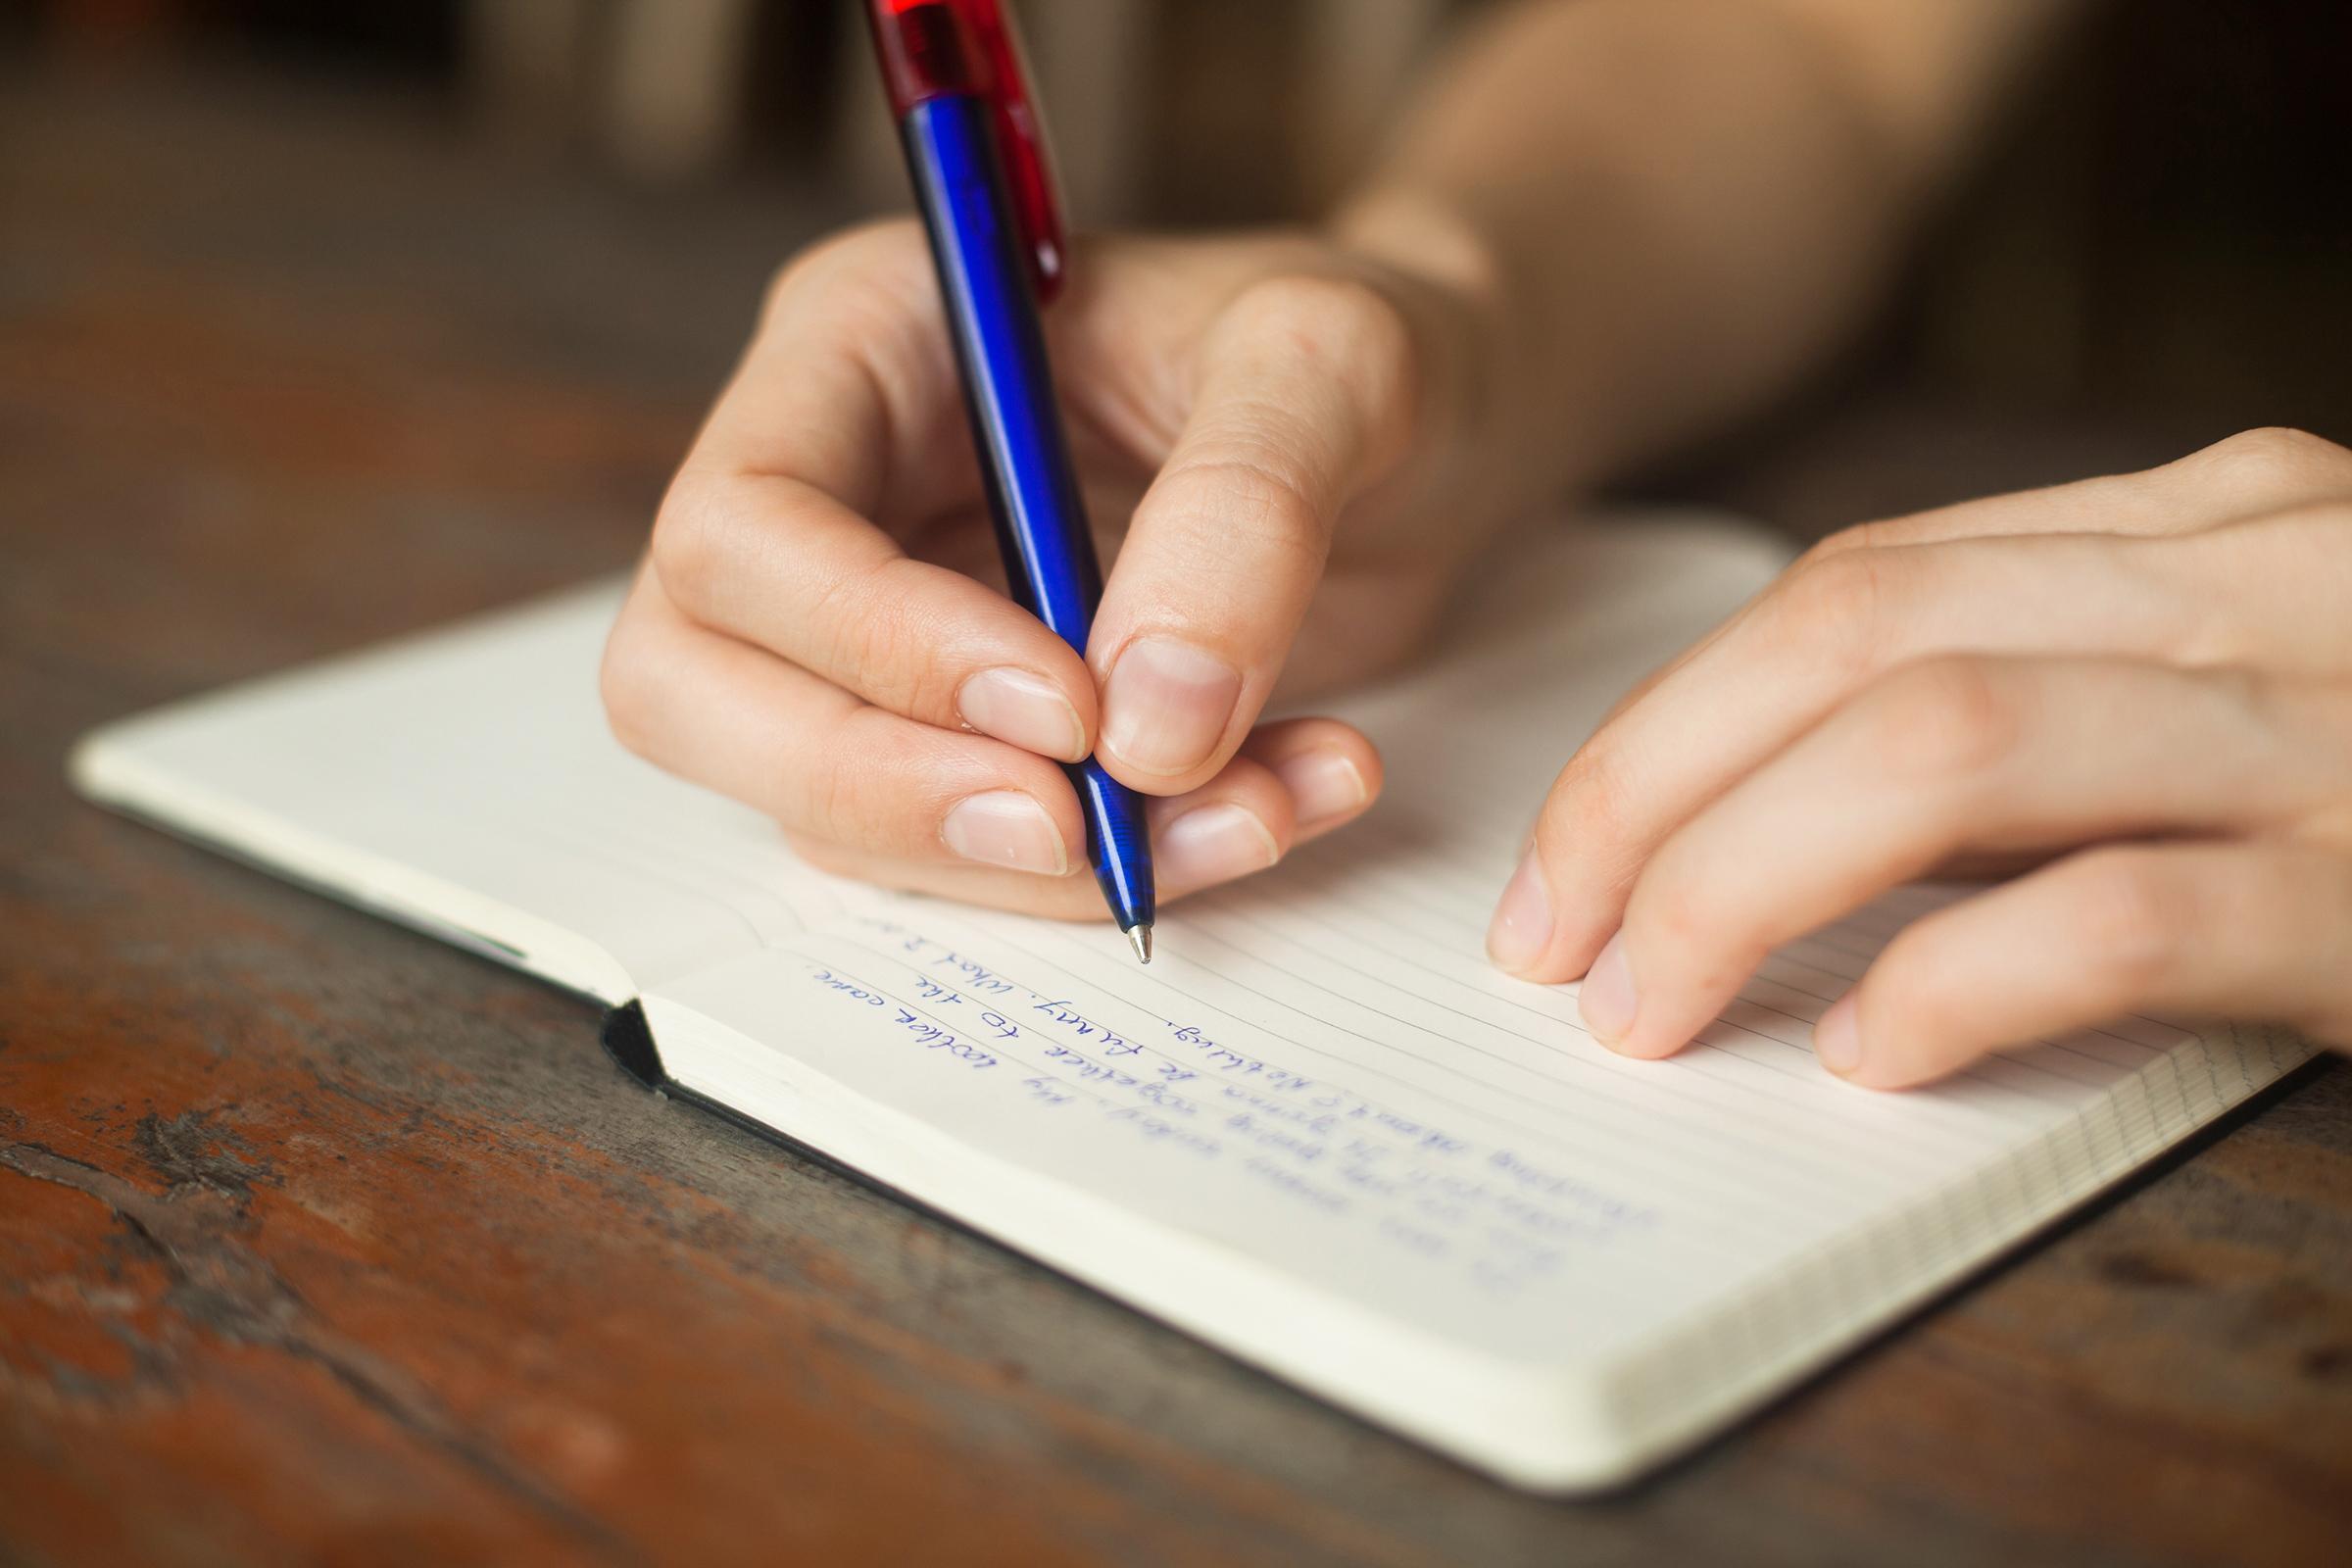 Handwriting Increases Brain Connectivity, Study Finds